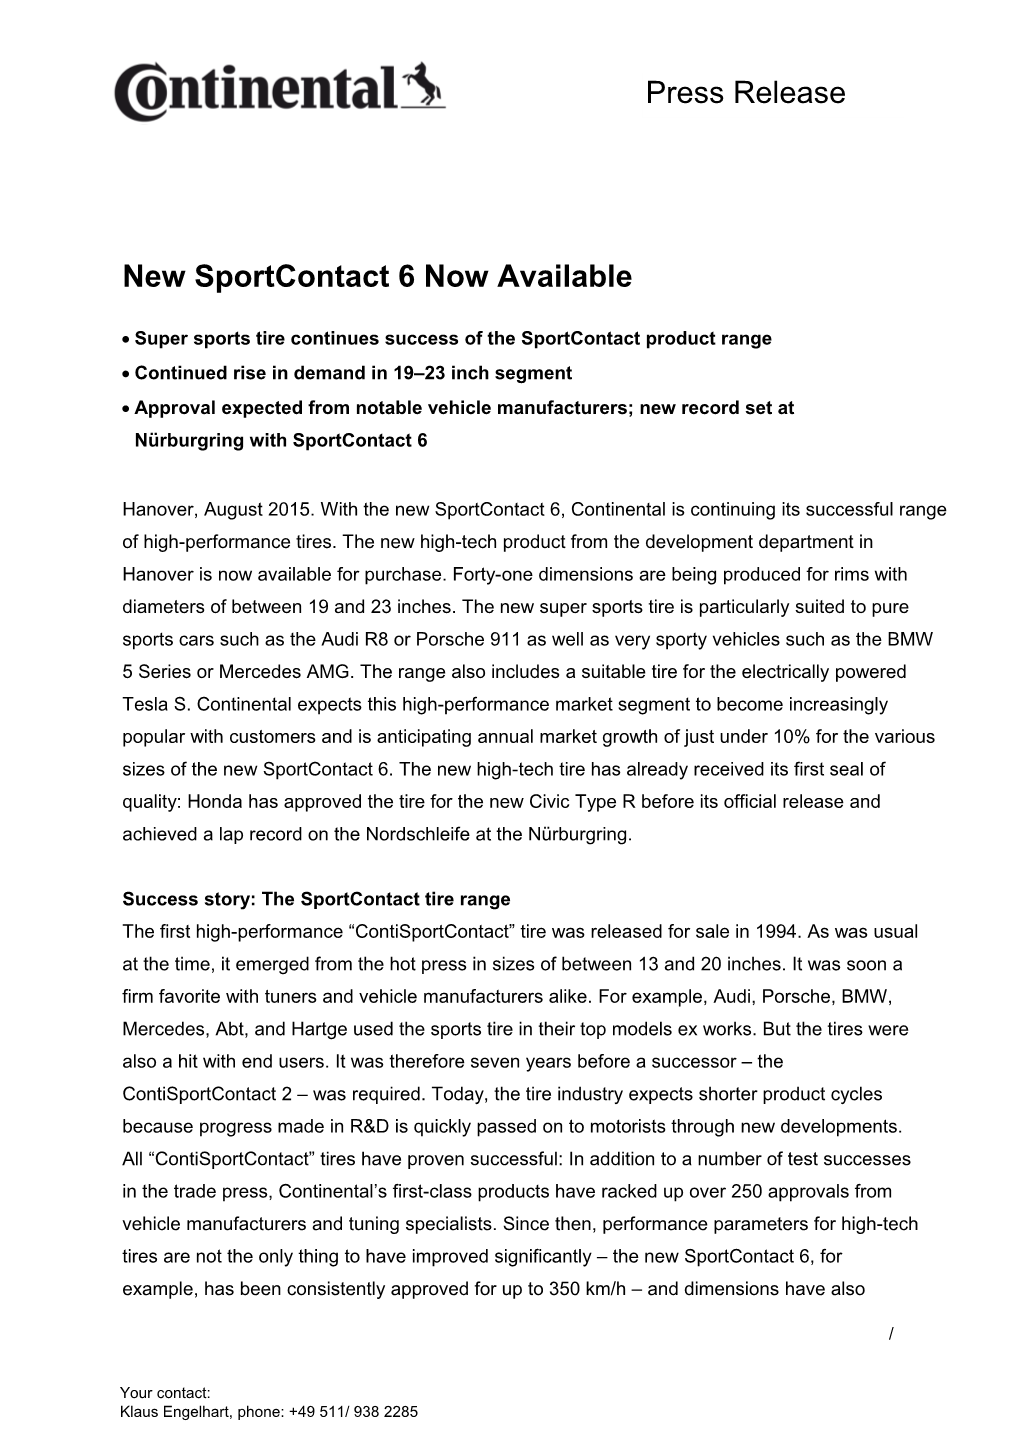 New Sportcontact 6 Now Available